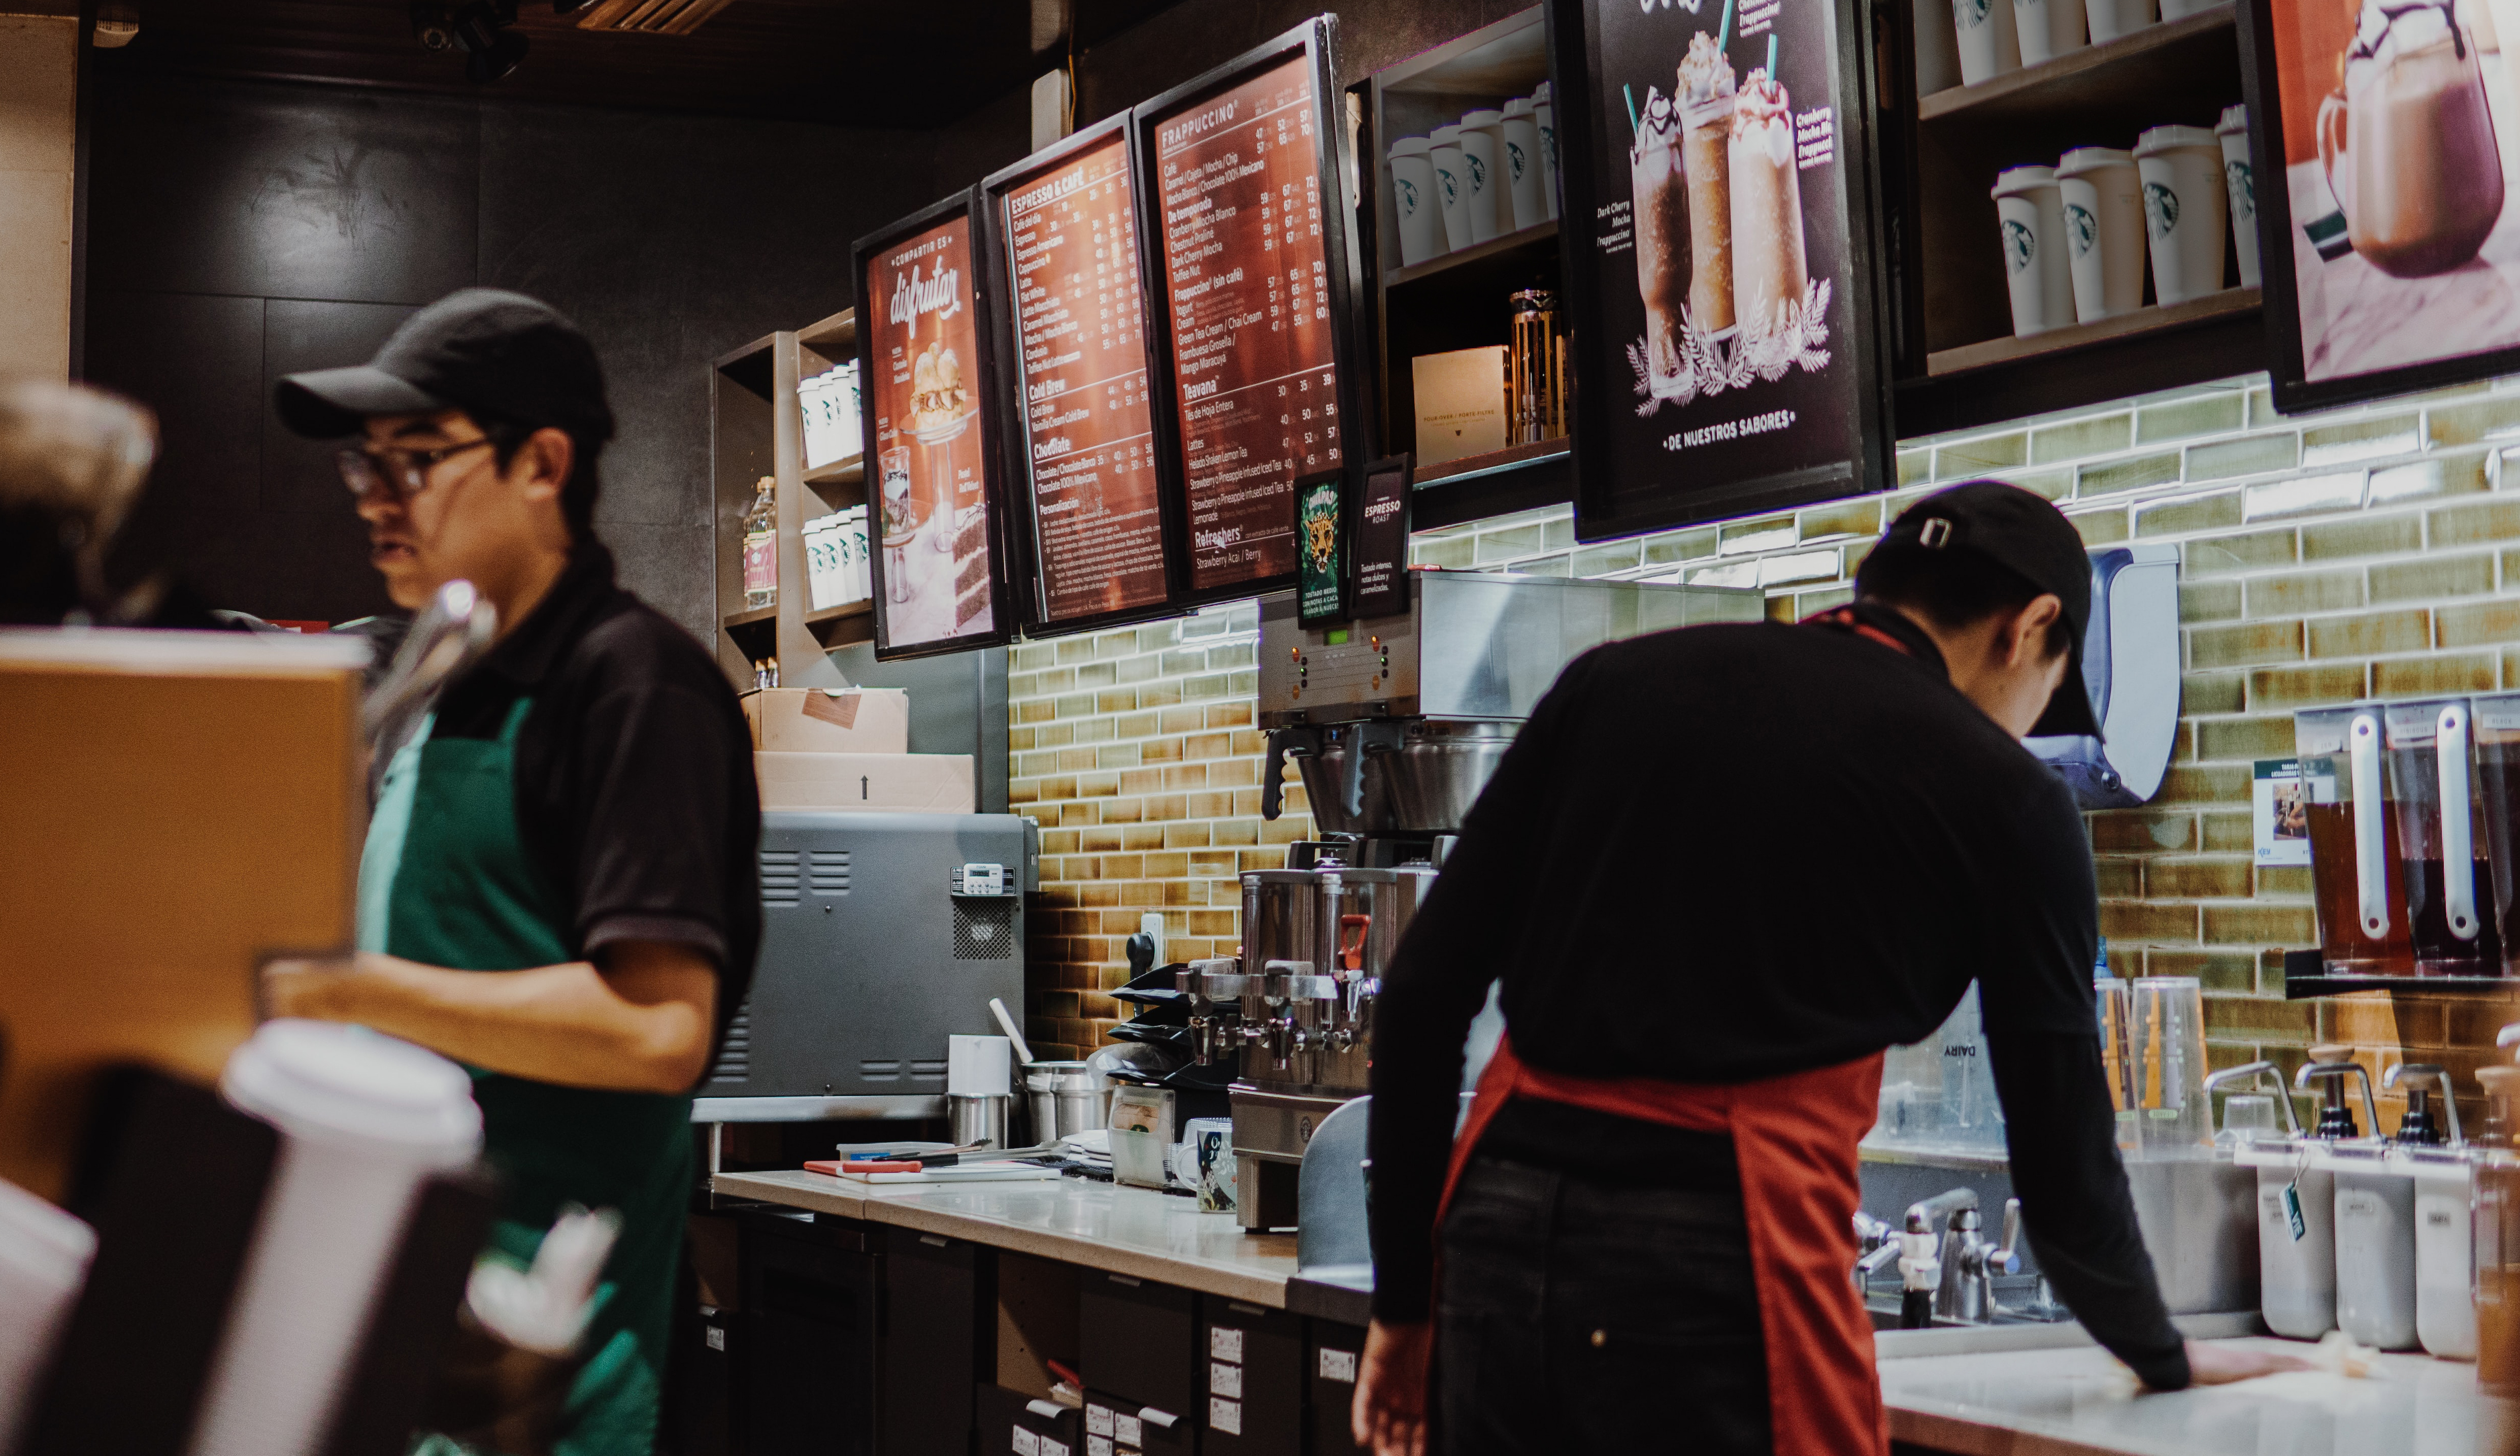 Two baristas work behind the counter of a coffee shop